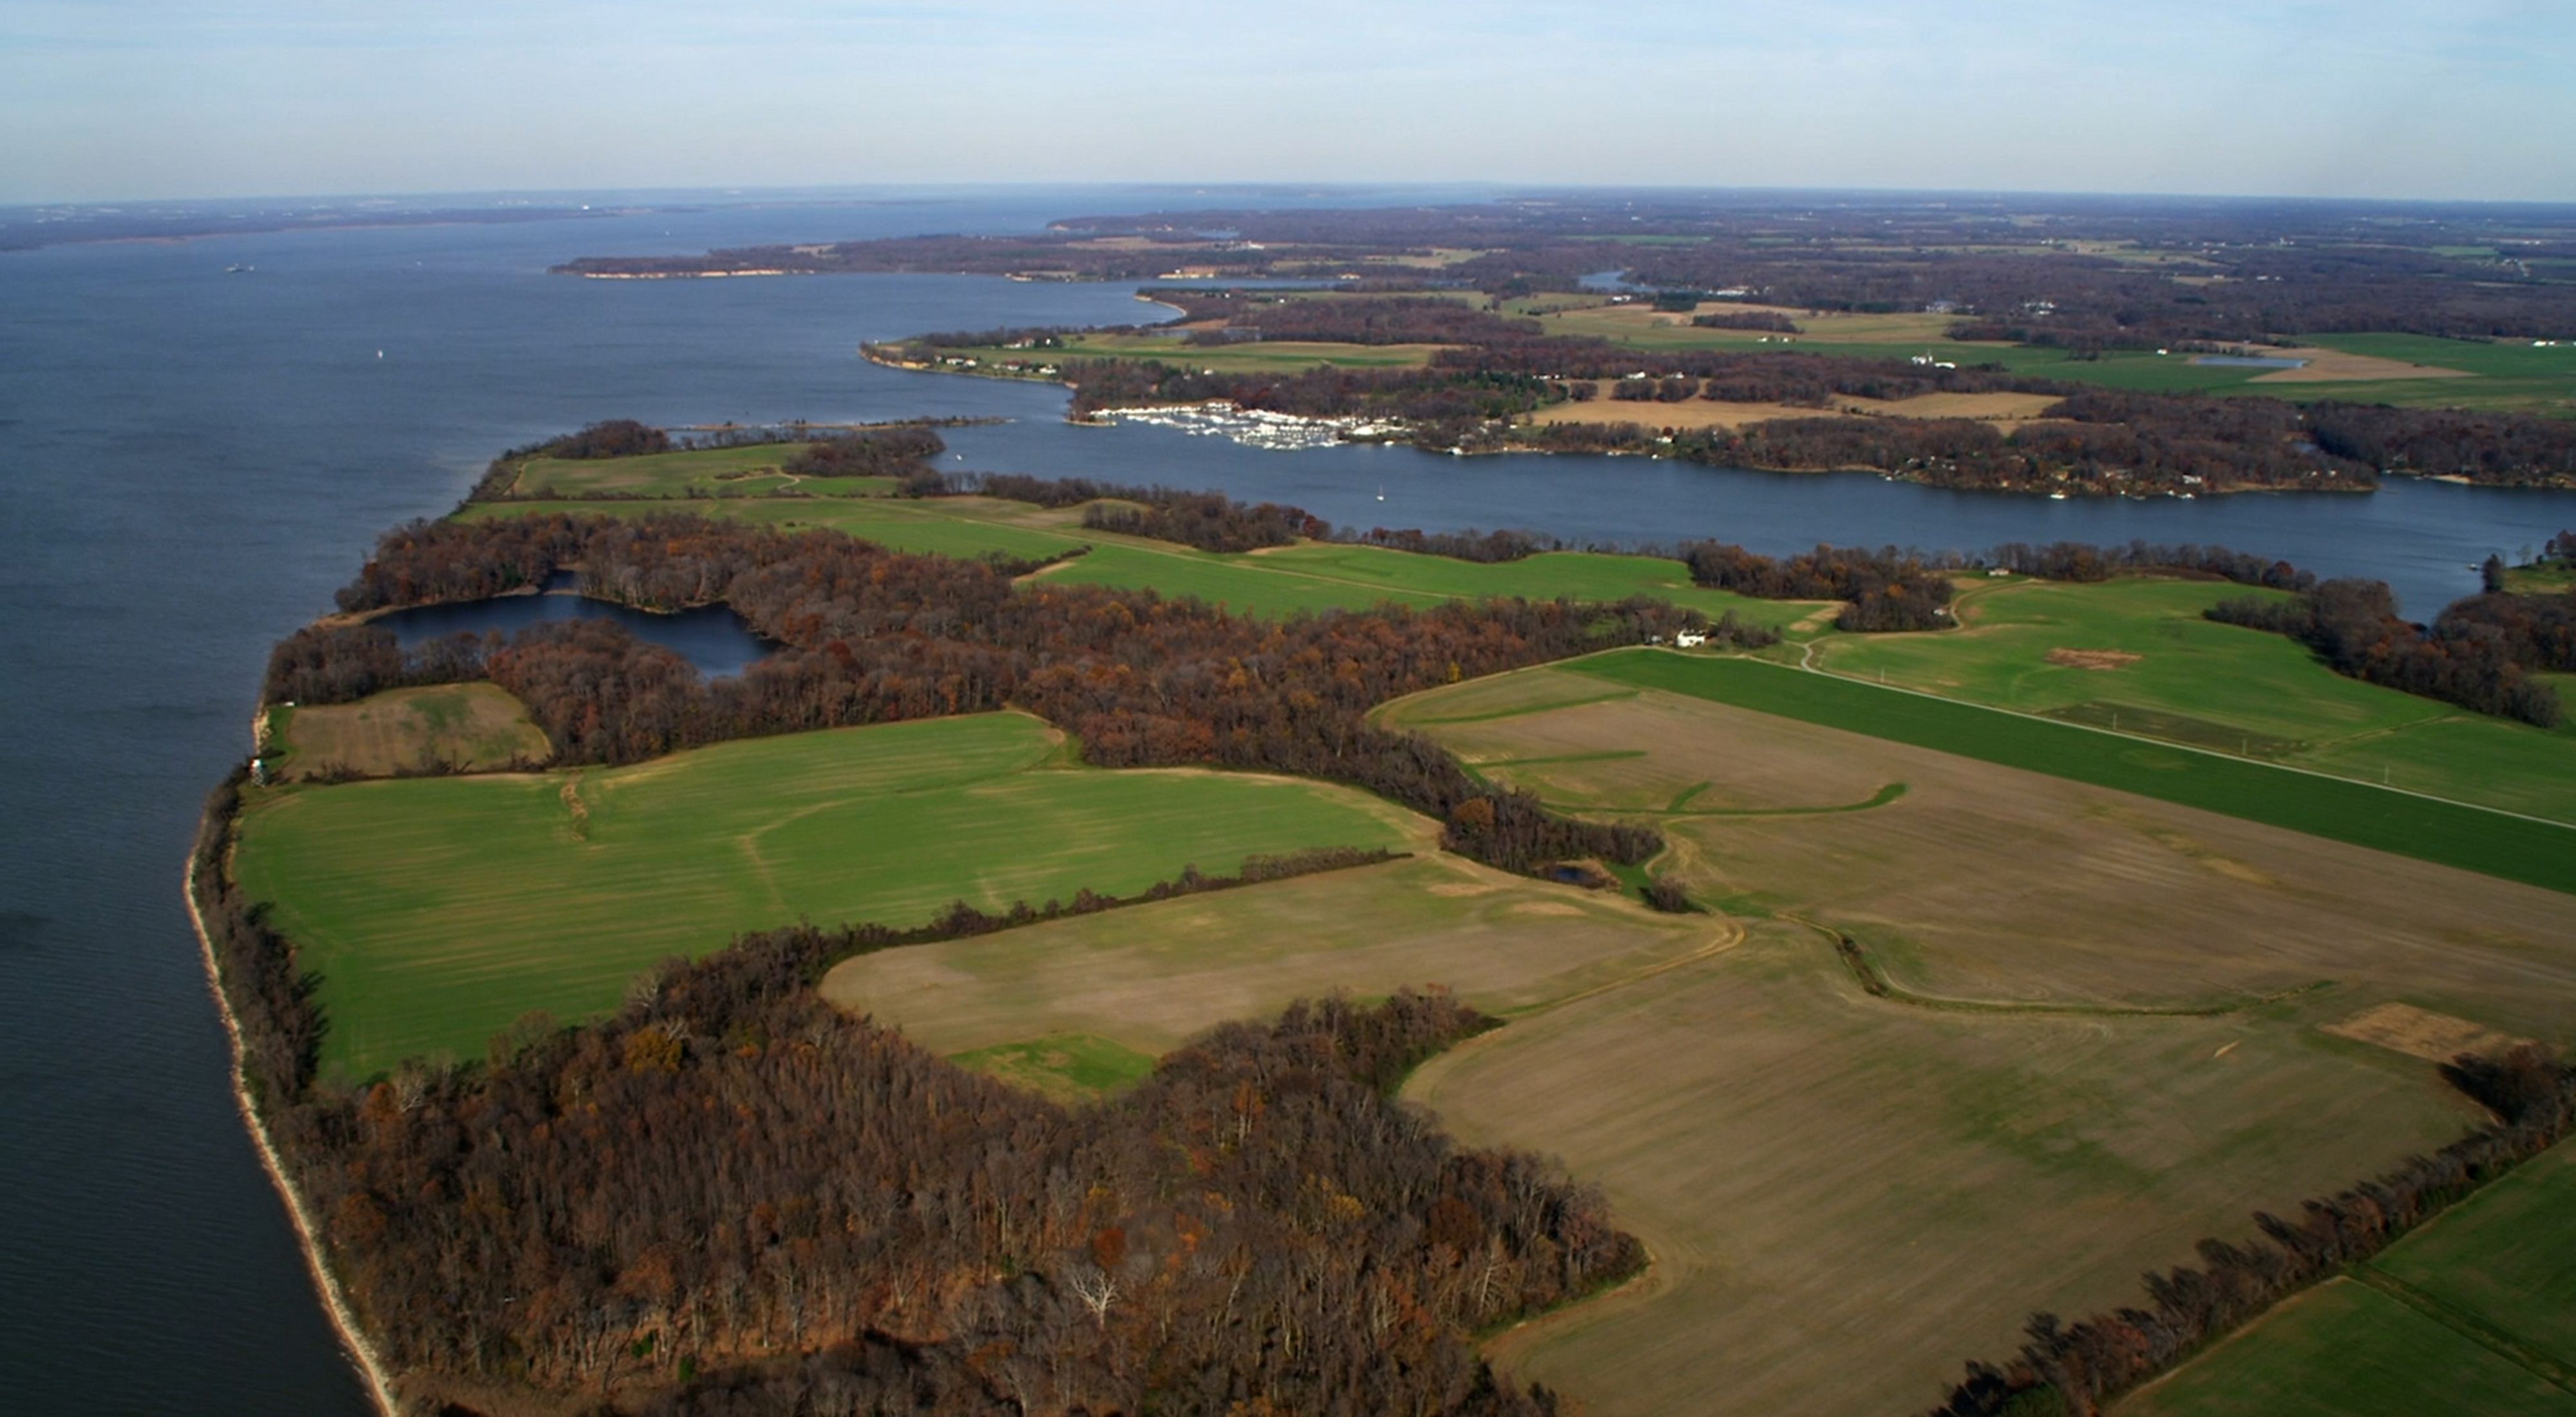 Aerial view of farmland on a wide finger of land extending into the Chesapeake Bay.